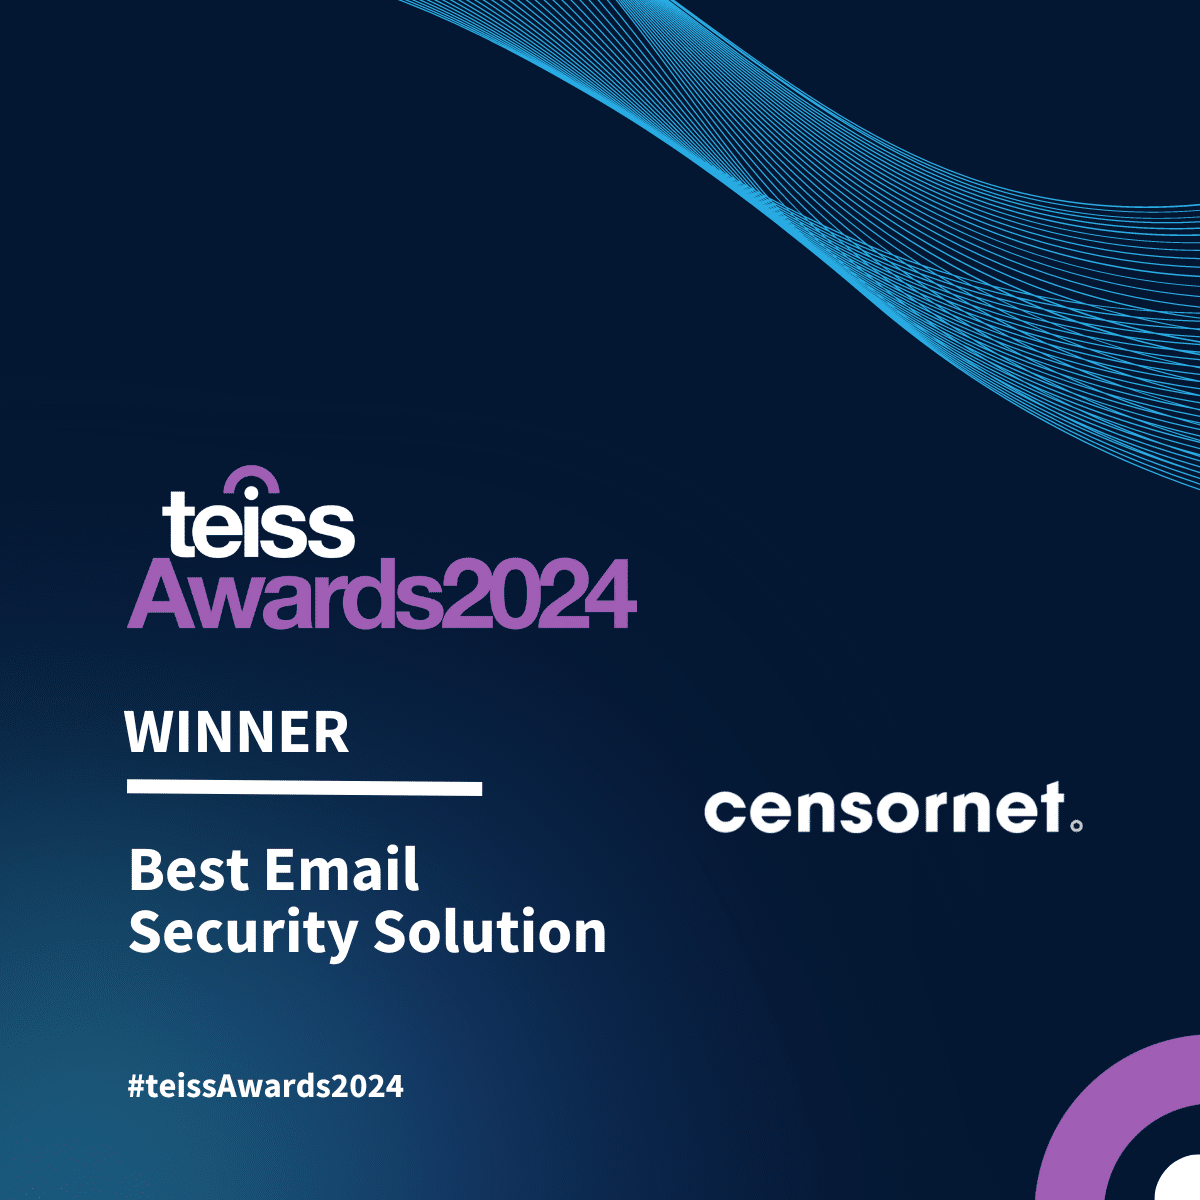 Censornet awarded best Email Security Solution at teissAwards2024